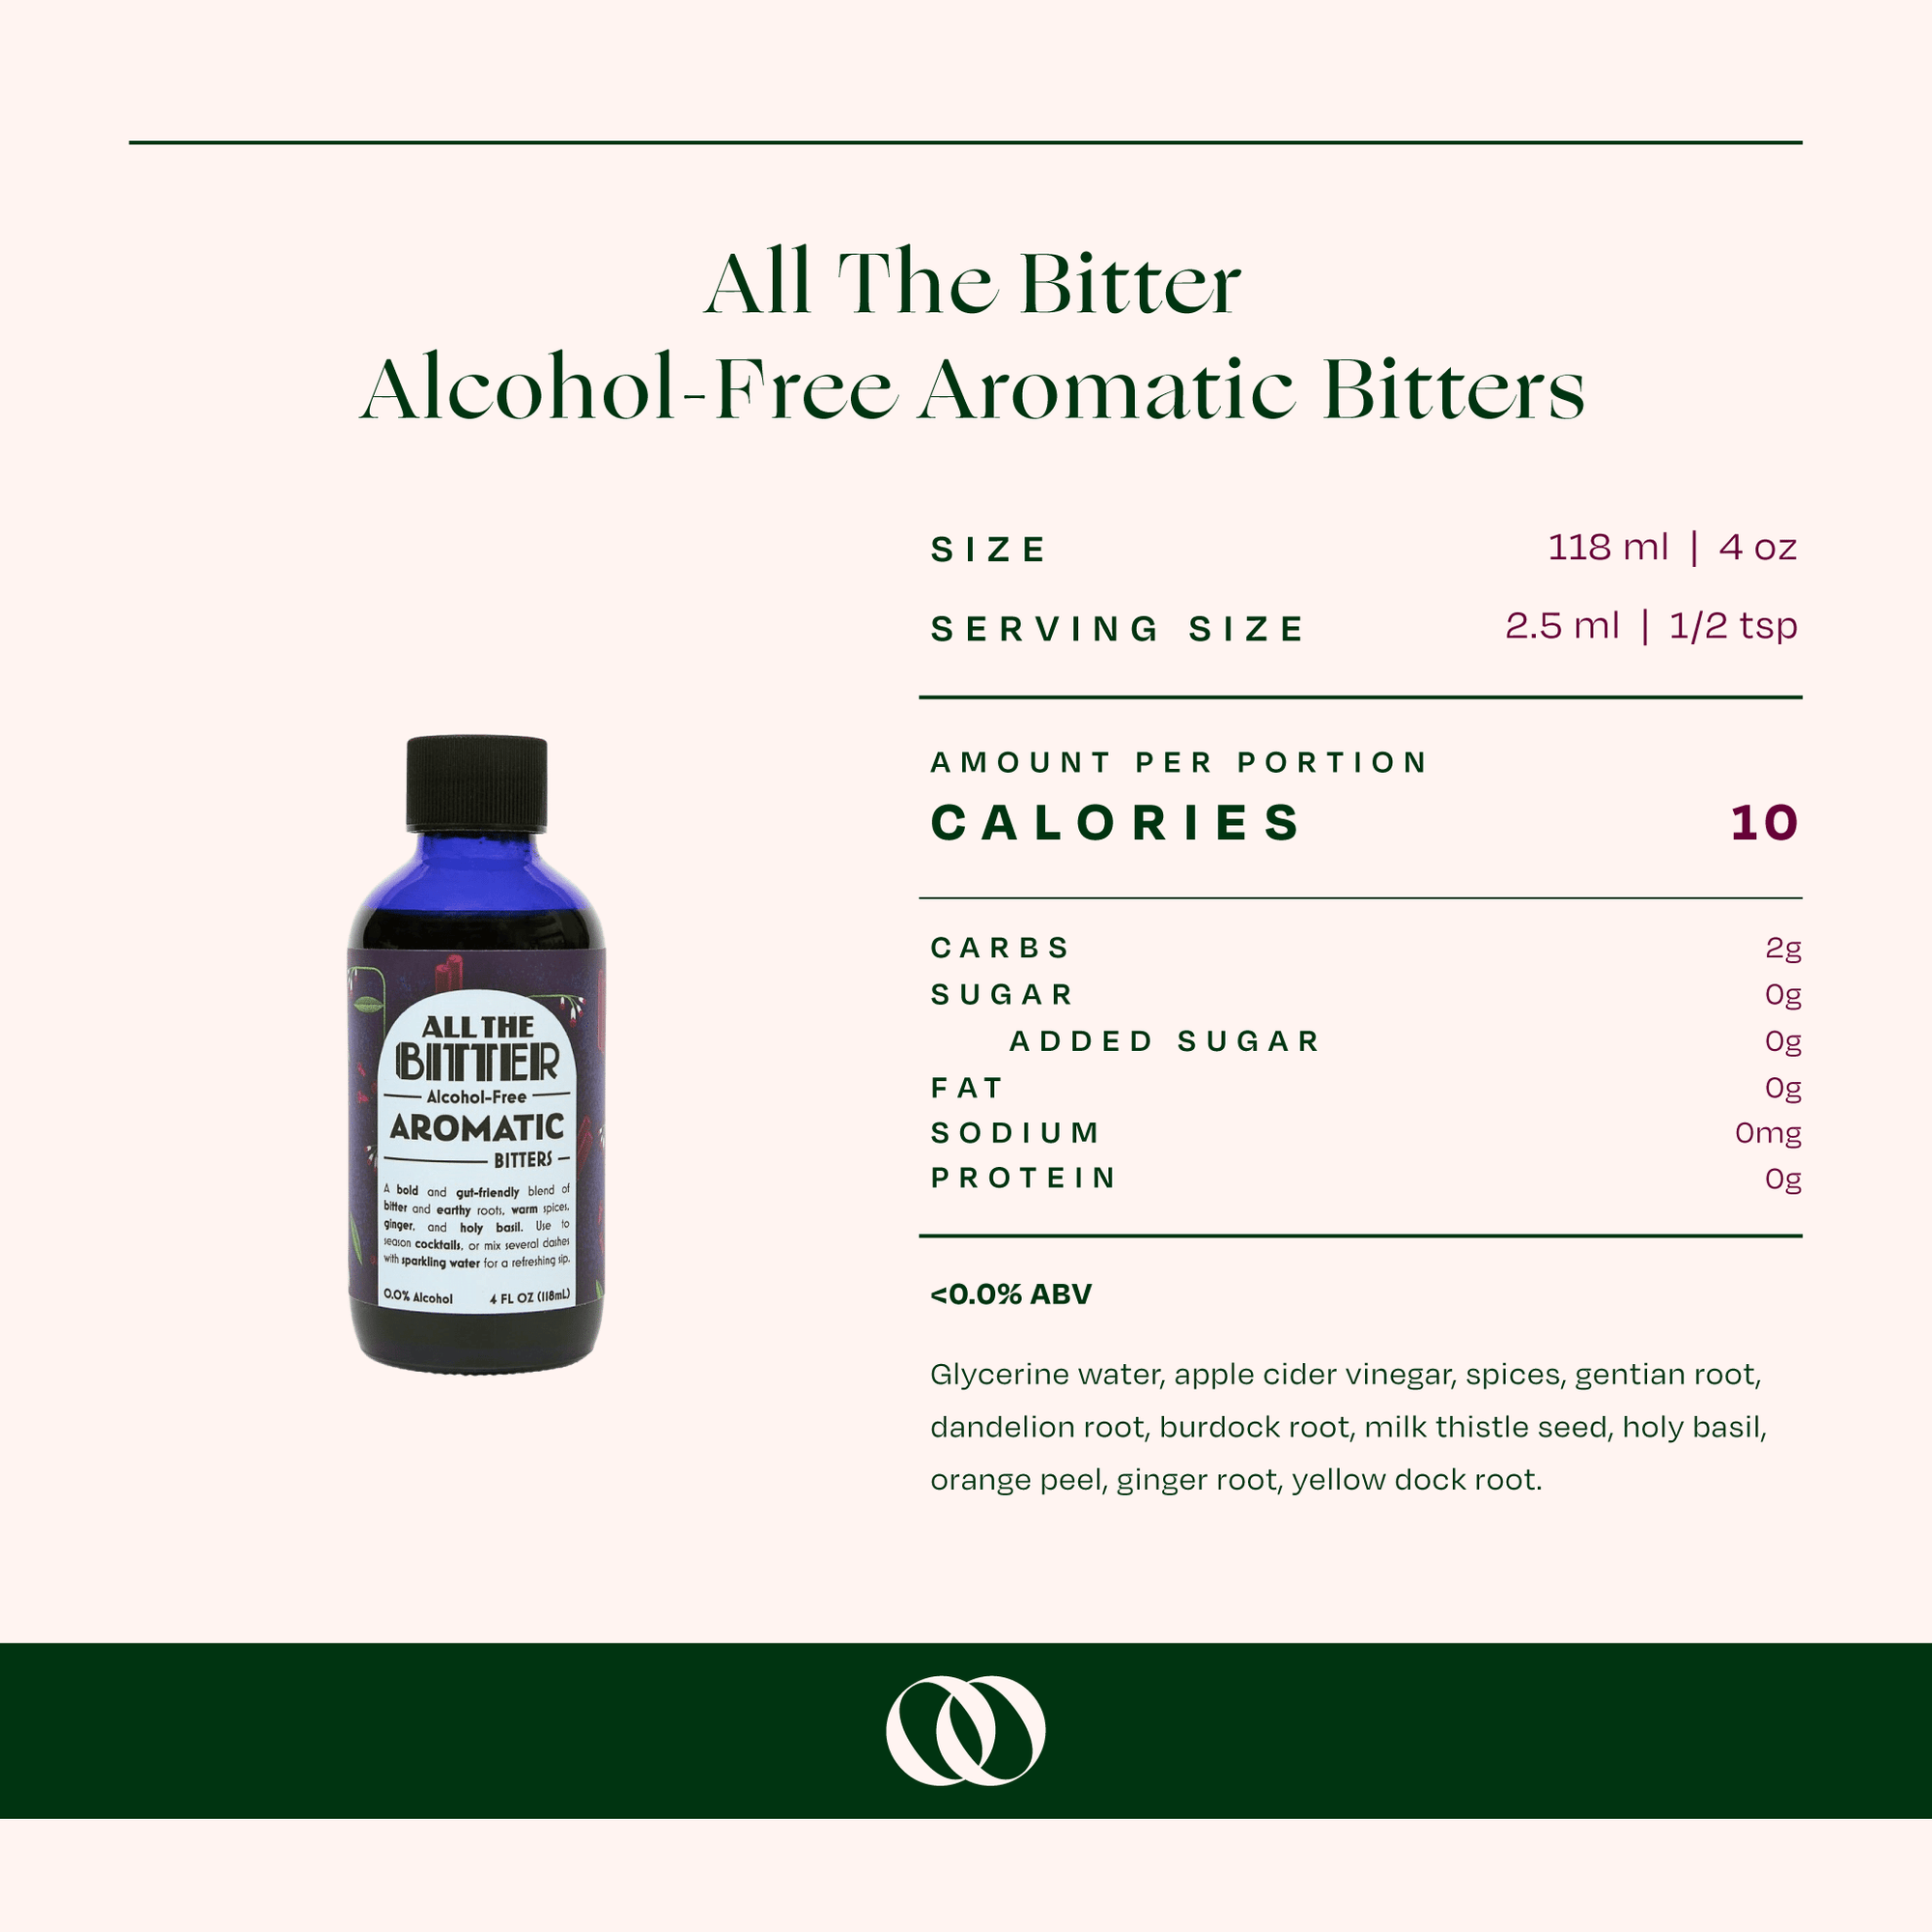 All The Bitter Alcohol-Free Aromatic Bitters - Boisson